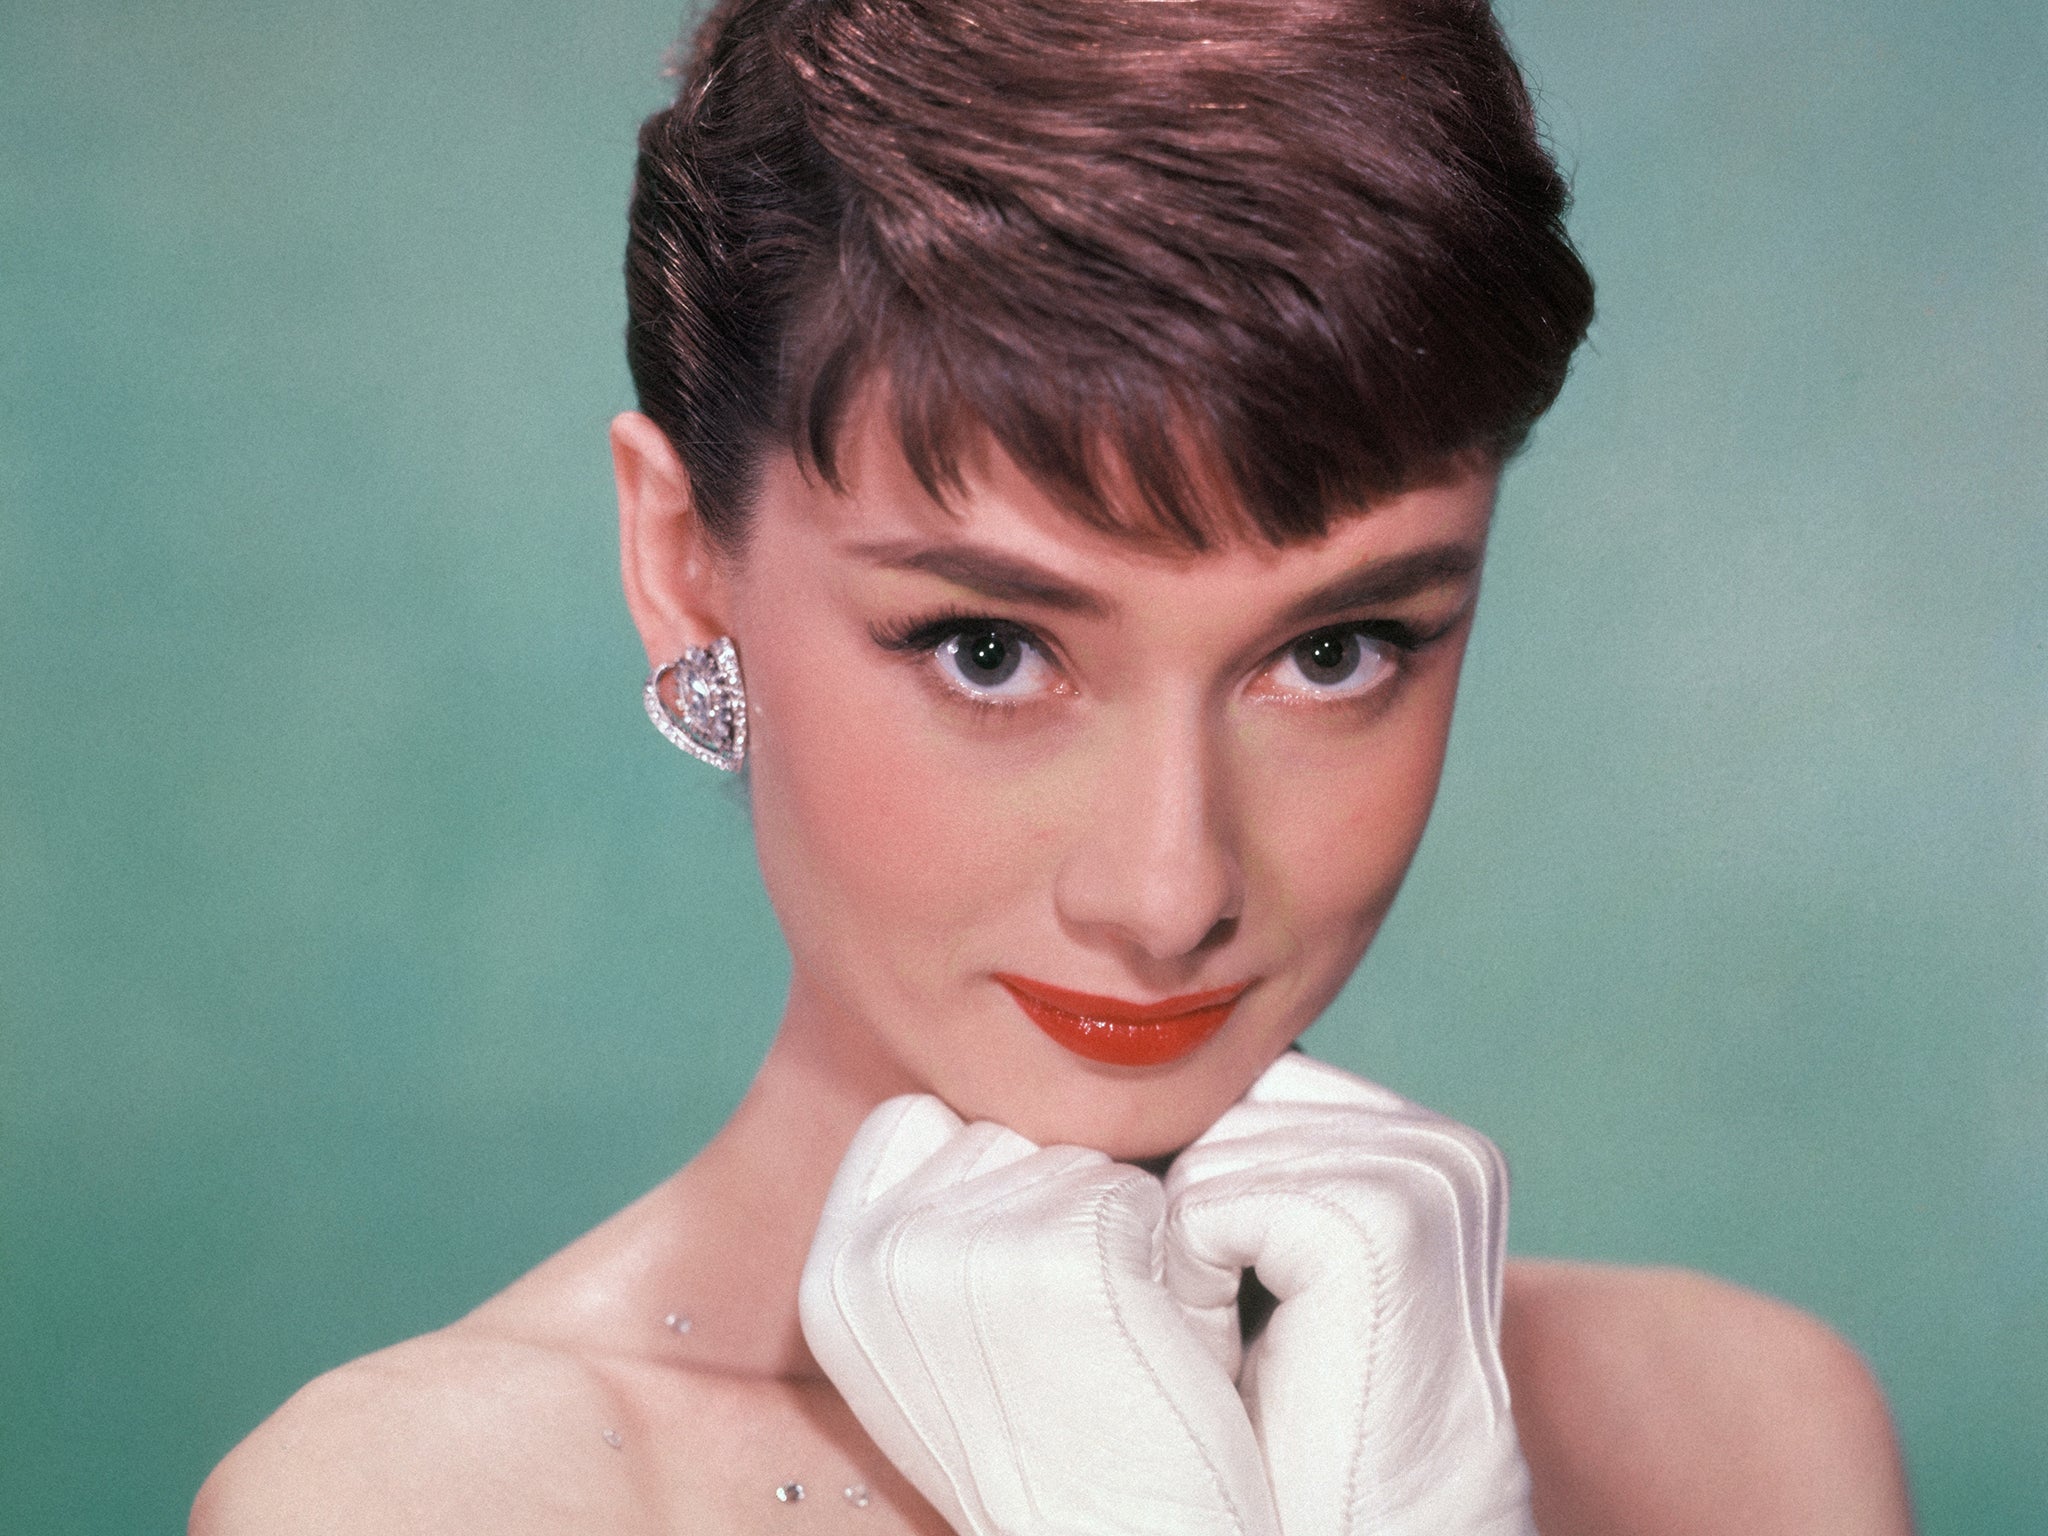 Audrey Hepburn – the icon of grace, class and elegance – was born in 1929